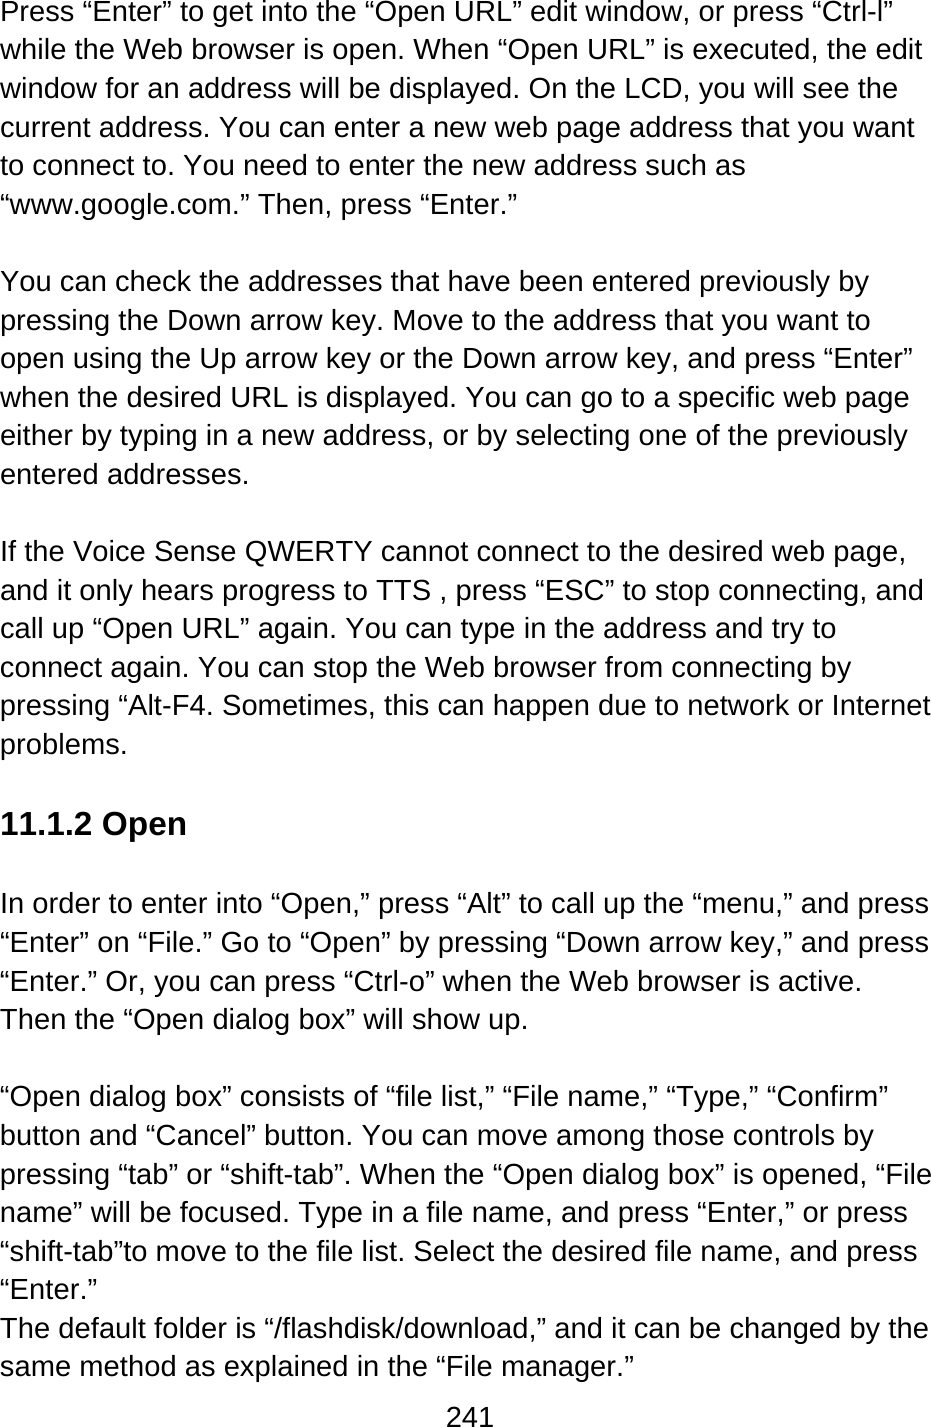 241  Press “Enter” to get into the “Open URL” edit window, or press “Ctrl-l” while the Web browser is open. When “Open URL” is executed, the edit window for an address will be displayed. On the LCD, you will see the current address. You can enter a new web page address that you want to connect to. You need to enter the new address such as “www.google.com.” Then, press “Enter.”  You can check the addresses that have been entered previously by pressing the Down arrow key. Move to the address that you want to open using the Up arrow key or the Down arrow key, and press “Enter” when the desired URL is displayed. You can go to a specific web page either by typing in a new address, or by selecting one of the previously entered addresses.  If the Voice Sense QWERTY cannot connect to the desired web page, and it only hears progress to TTS , press “ESC” to stop connecting, and call up “Open URL” again. You can type in the address and try to connect again. You can stop the Web browser from connecting by pressing “Alt-F4. Sometimes, this can happen due to network or Internet problems.  11.1.2 Open  In order to enter into “Open,” press “Alt” to call up the “menu,” and press “Enter” on “File.” Go to “Open” by pressing “Down arrow key,” and press “Enter.” Or, you can press “Ctrl-o” when the Web browser is active.   Then the “Open dialog box” will show up.  “Open dialog box” consists of “file list,” “File name,” “Type,” “Confirm” button and “Cancel” button. You can move among those controls by pressing “tab” or “shift-tab”. When the “Open dialog box” is opened, “File name” will be focused. Type in a file name, and press “Enter,” or press “shift-tab”to move to the file list. Select the desired file name, and press “Enter.” The default folder is “/flashdisk/download,” and it can be changed by the same method as explained in the “File manager.” 